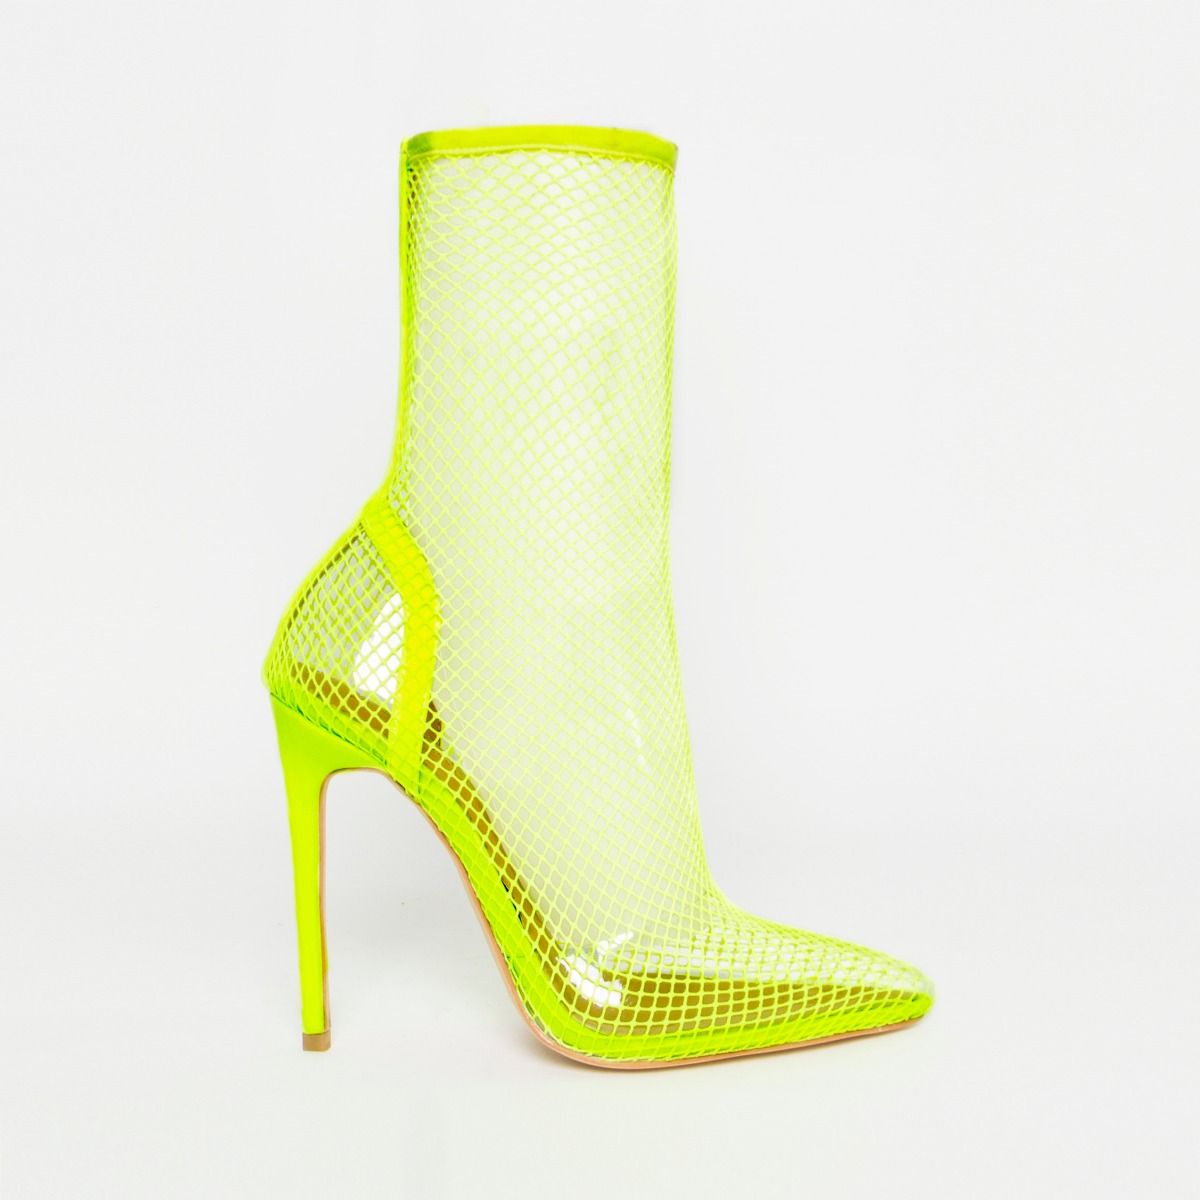 neon yellow and clear heels